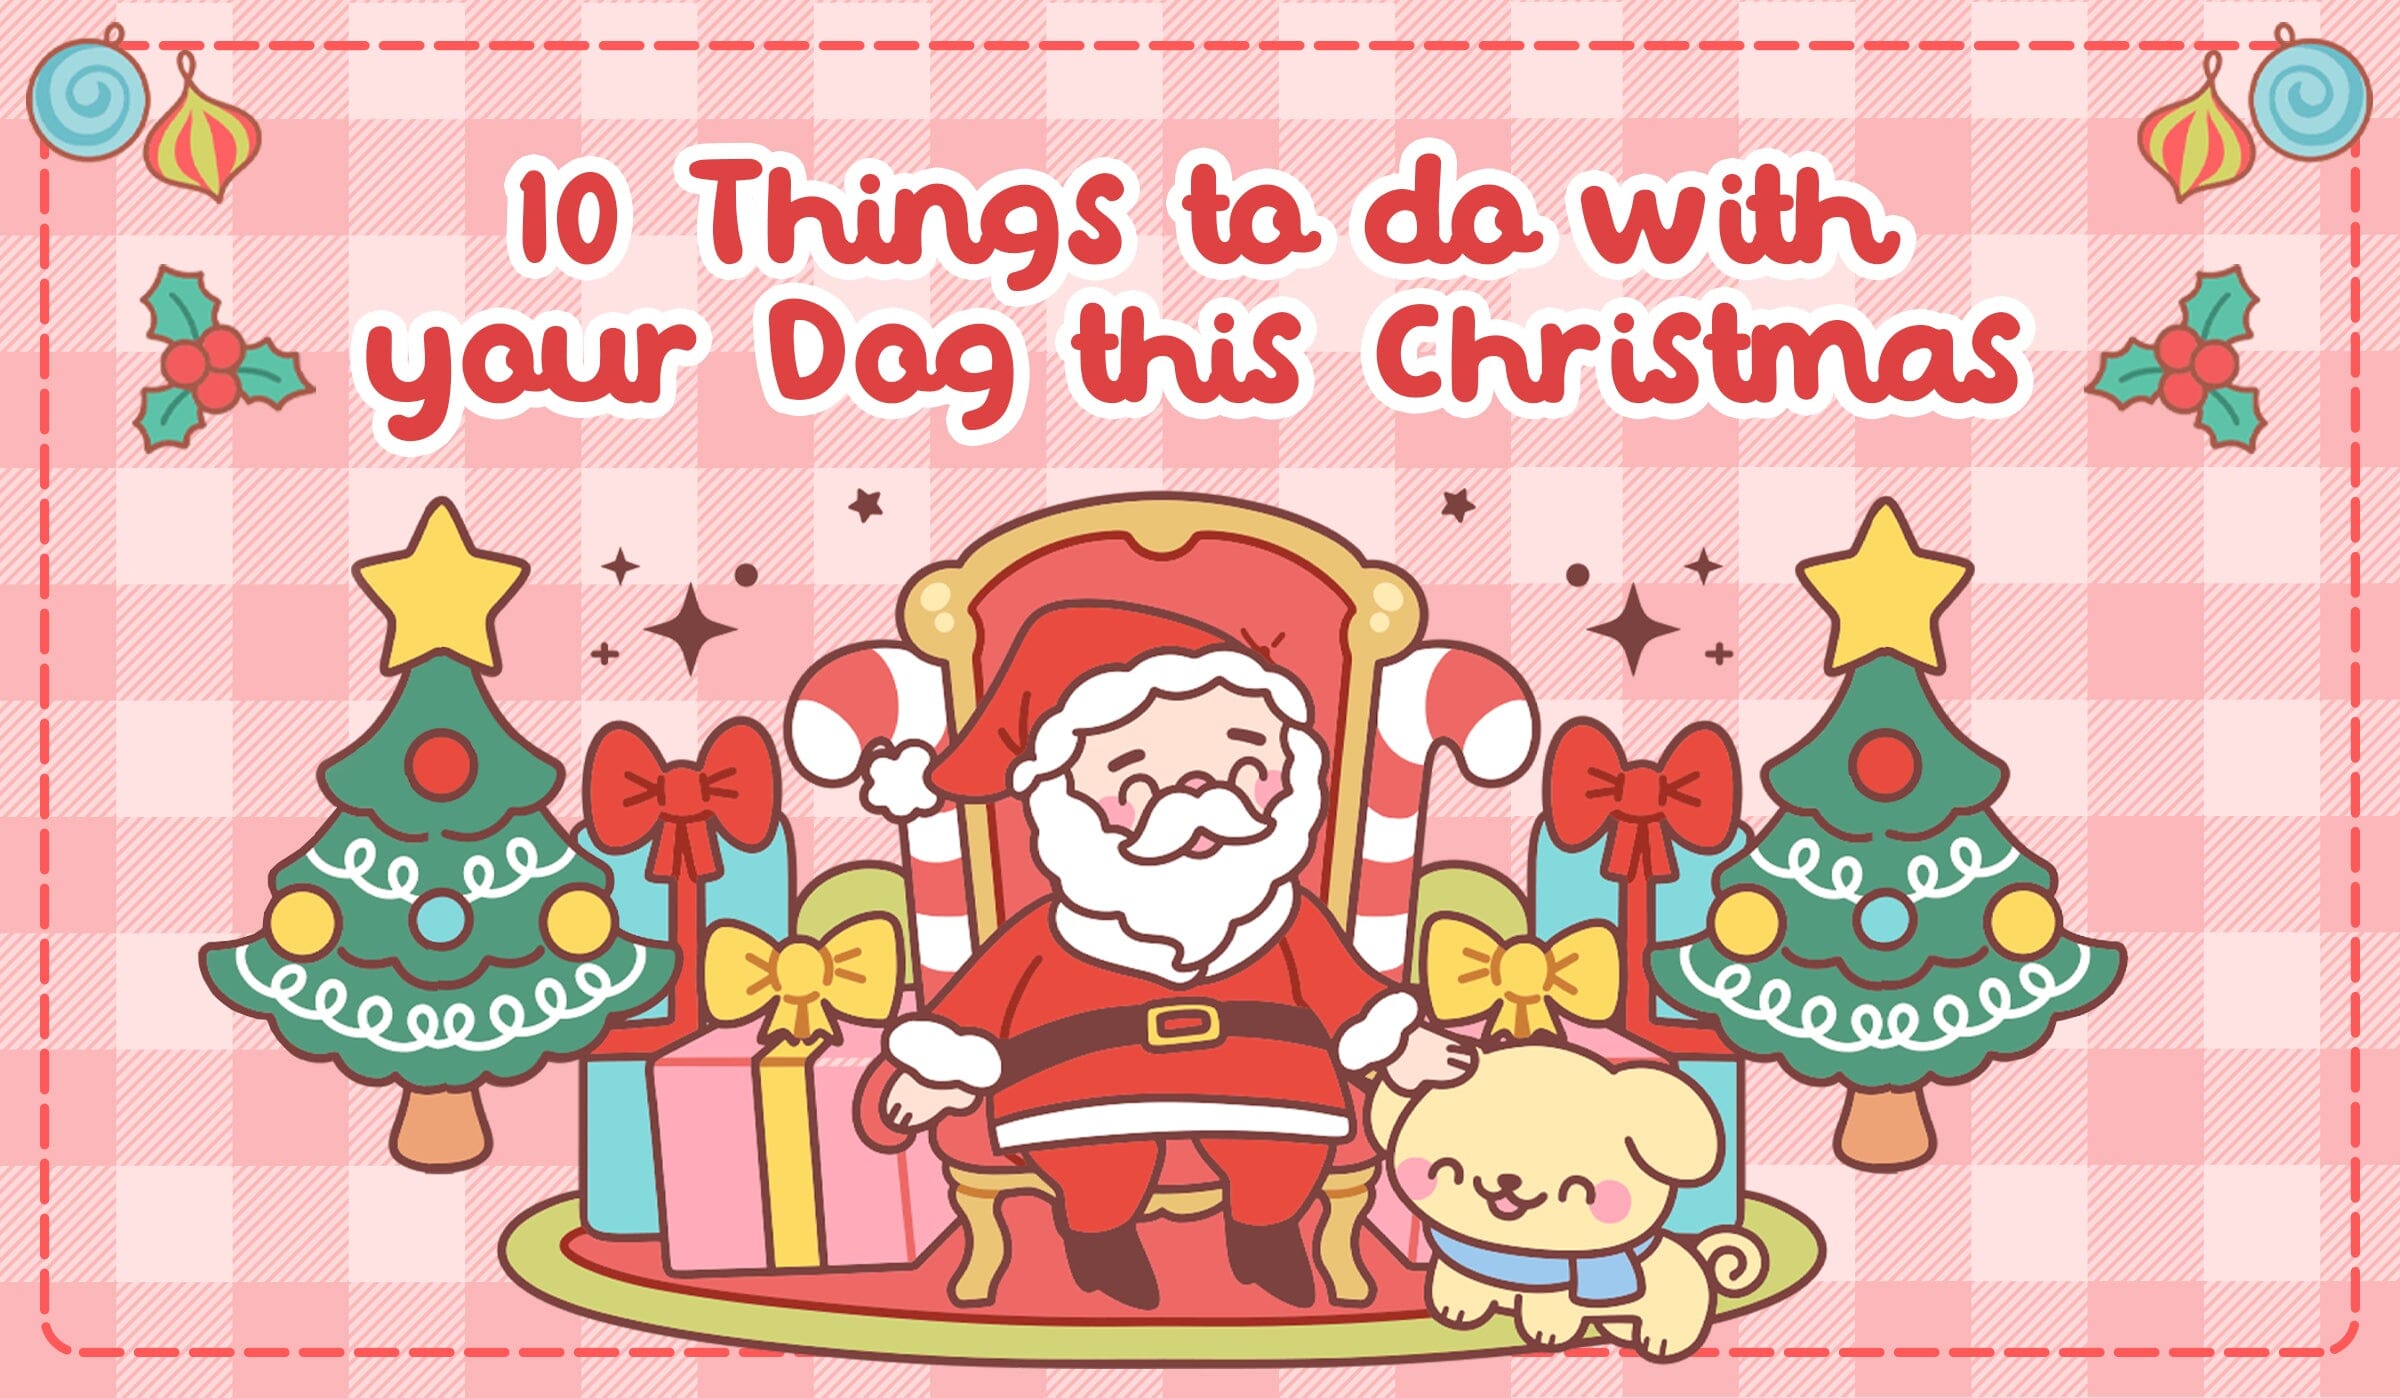 10 Things To Do With Your Dog this Christmas